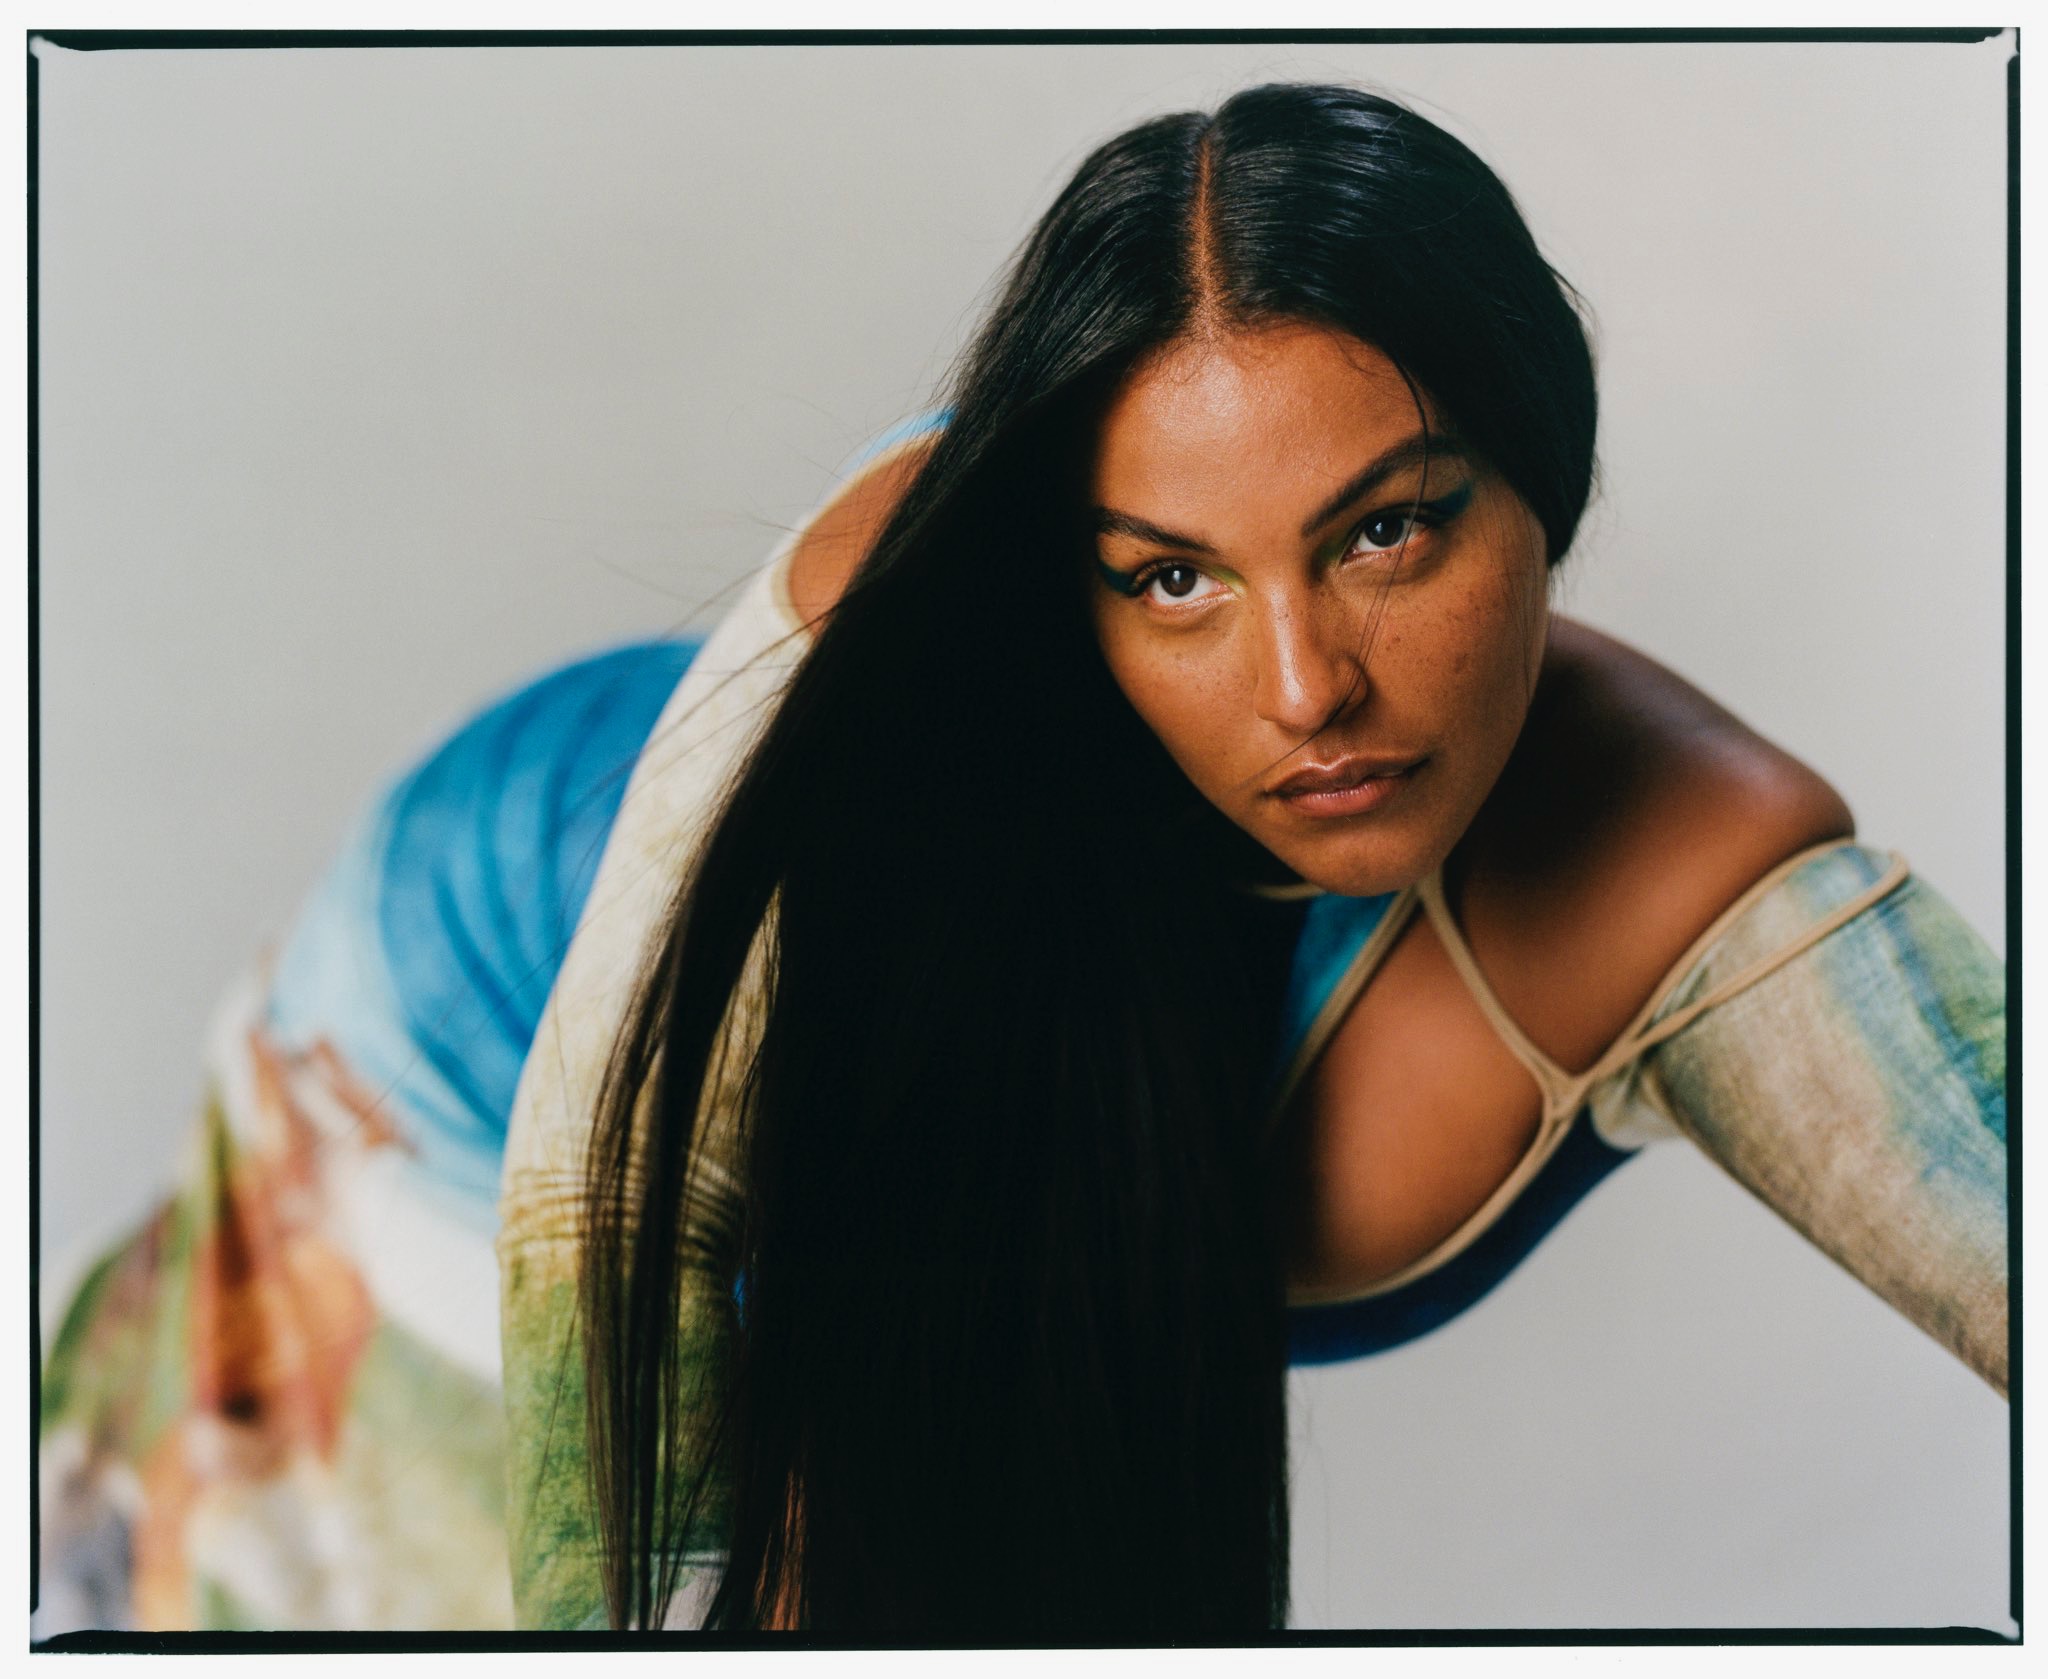 Cultured Podcast "Points of View" Debuts With Model Paloma Elsesser